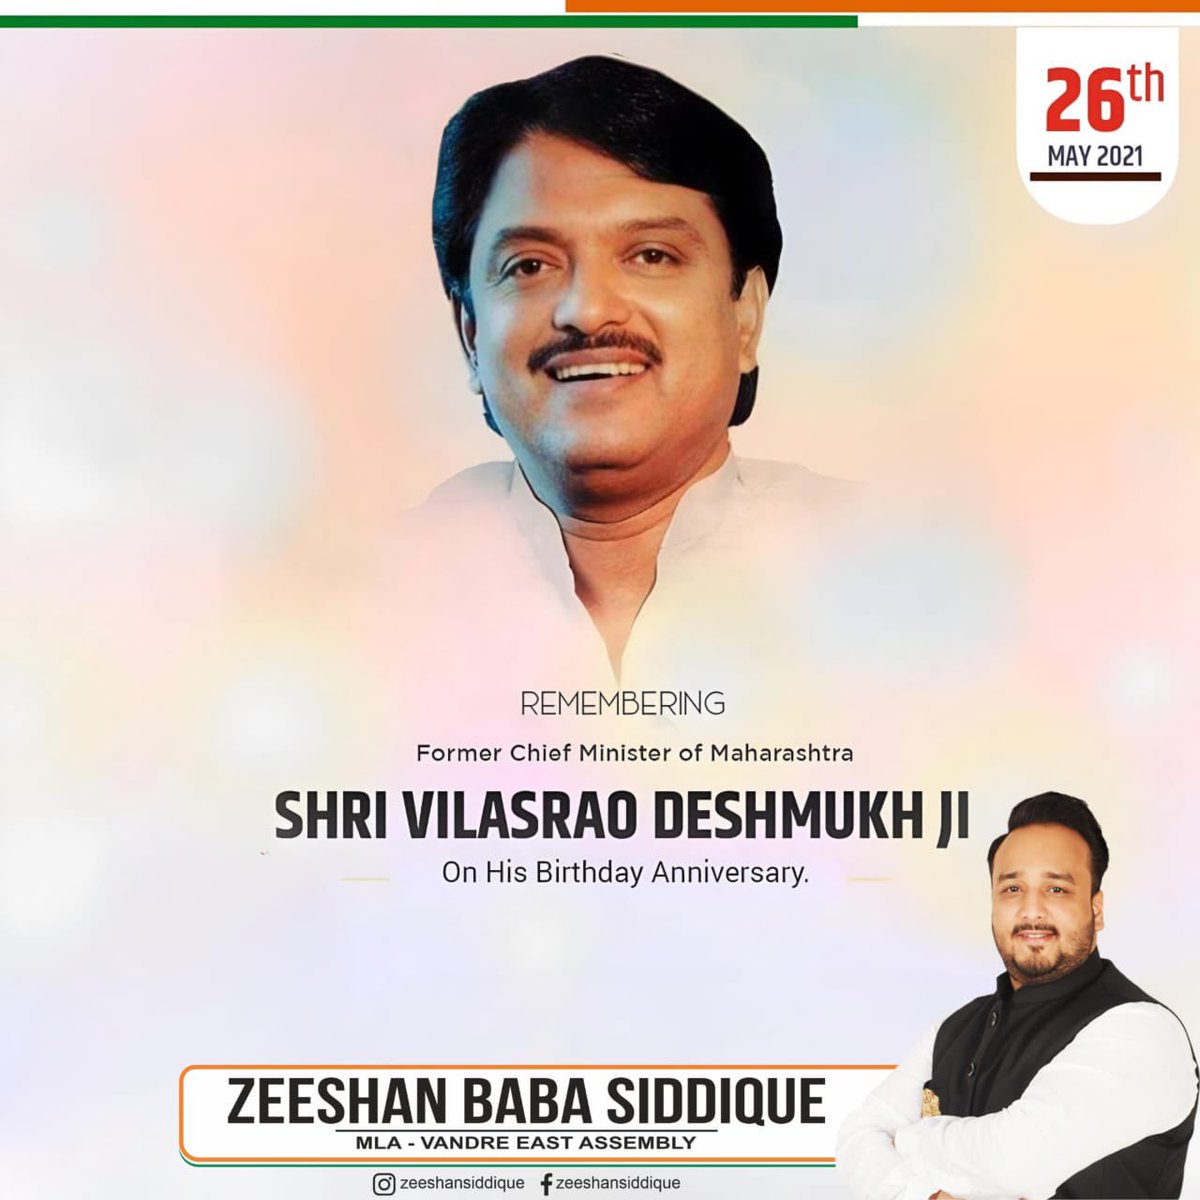 Remembering former CM of Maharashtra Shri Vilasrao Deshmukh ji on his birth anniversary. The people's leader, who devoted his life for the people of Maharashtra, he is still remembered for his pathbreaking policies for the common man.